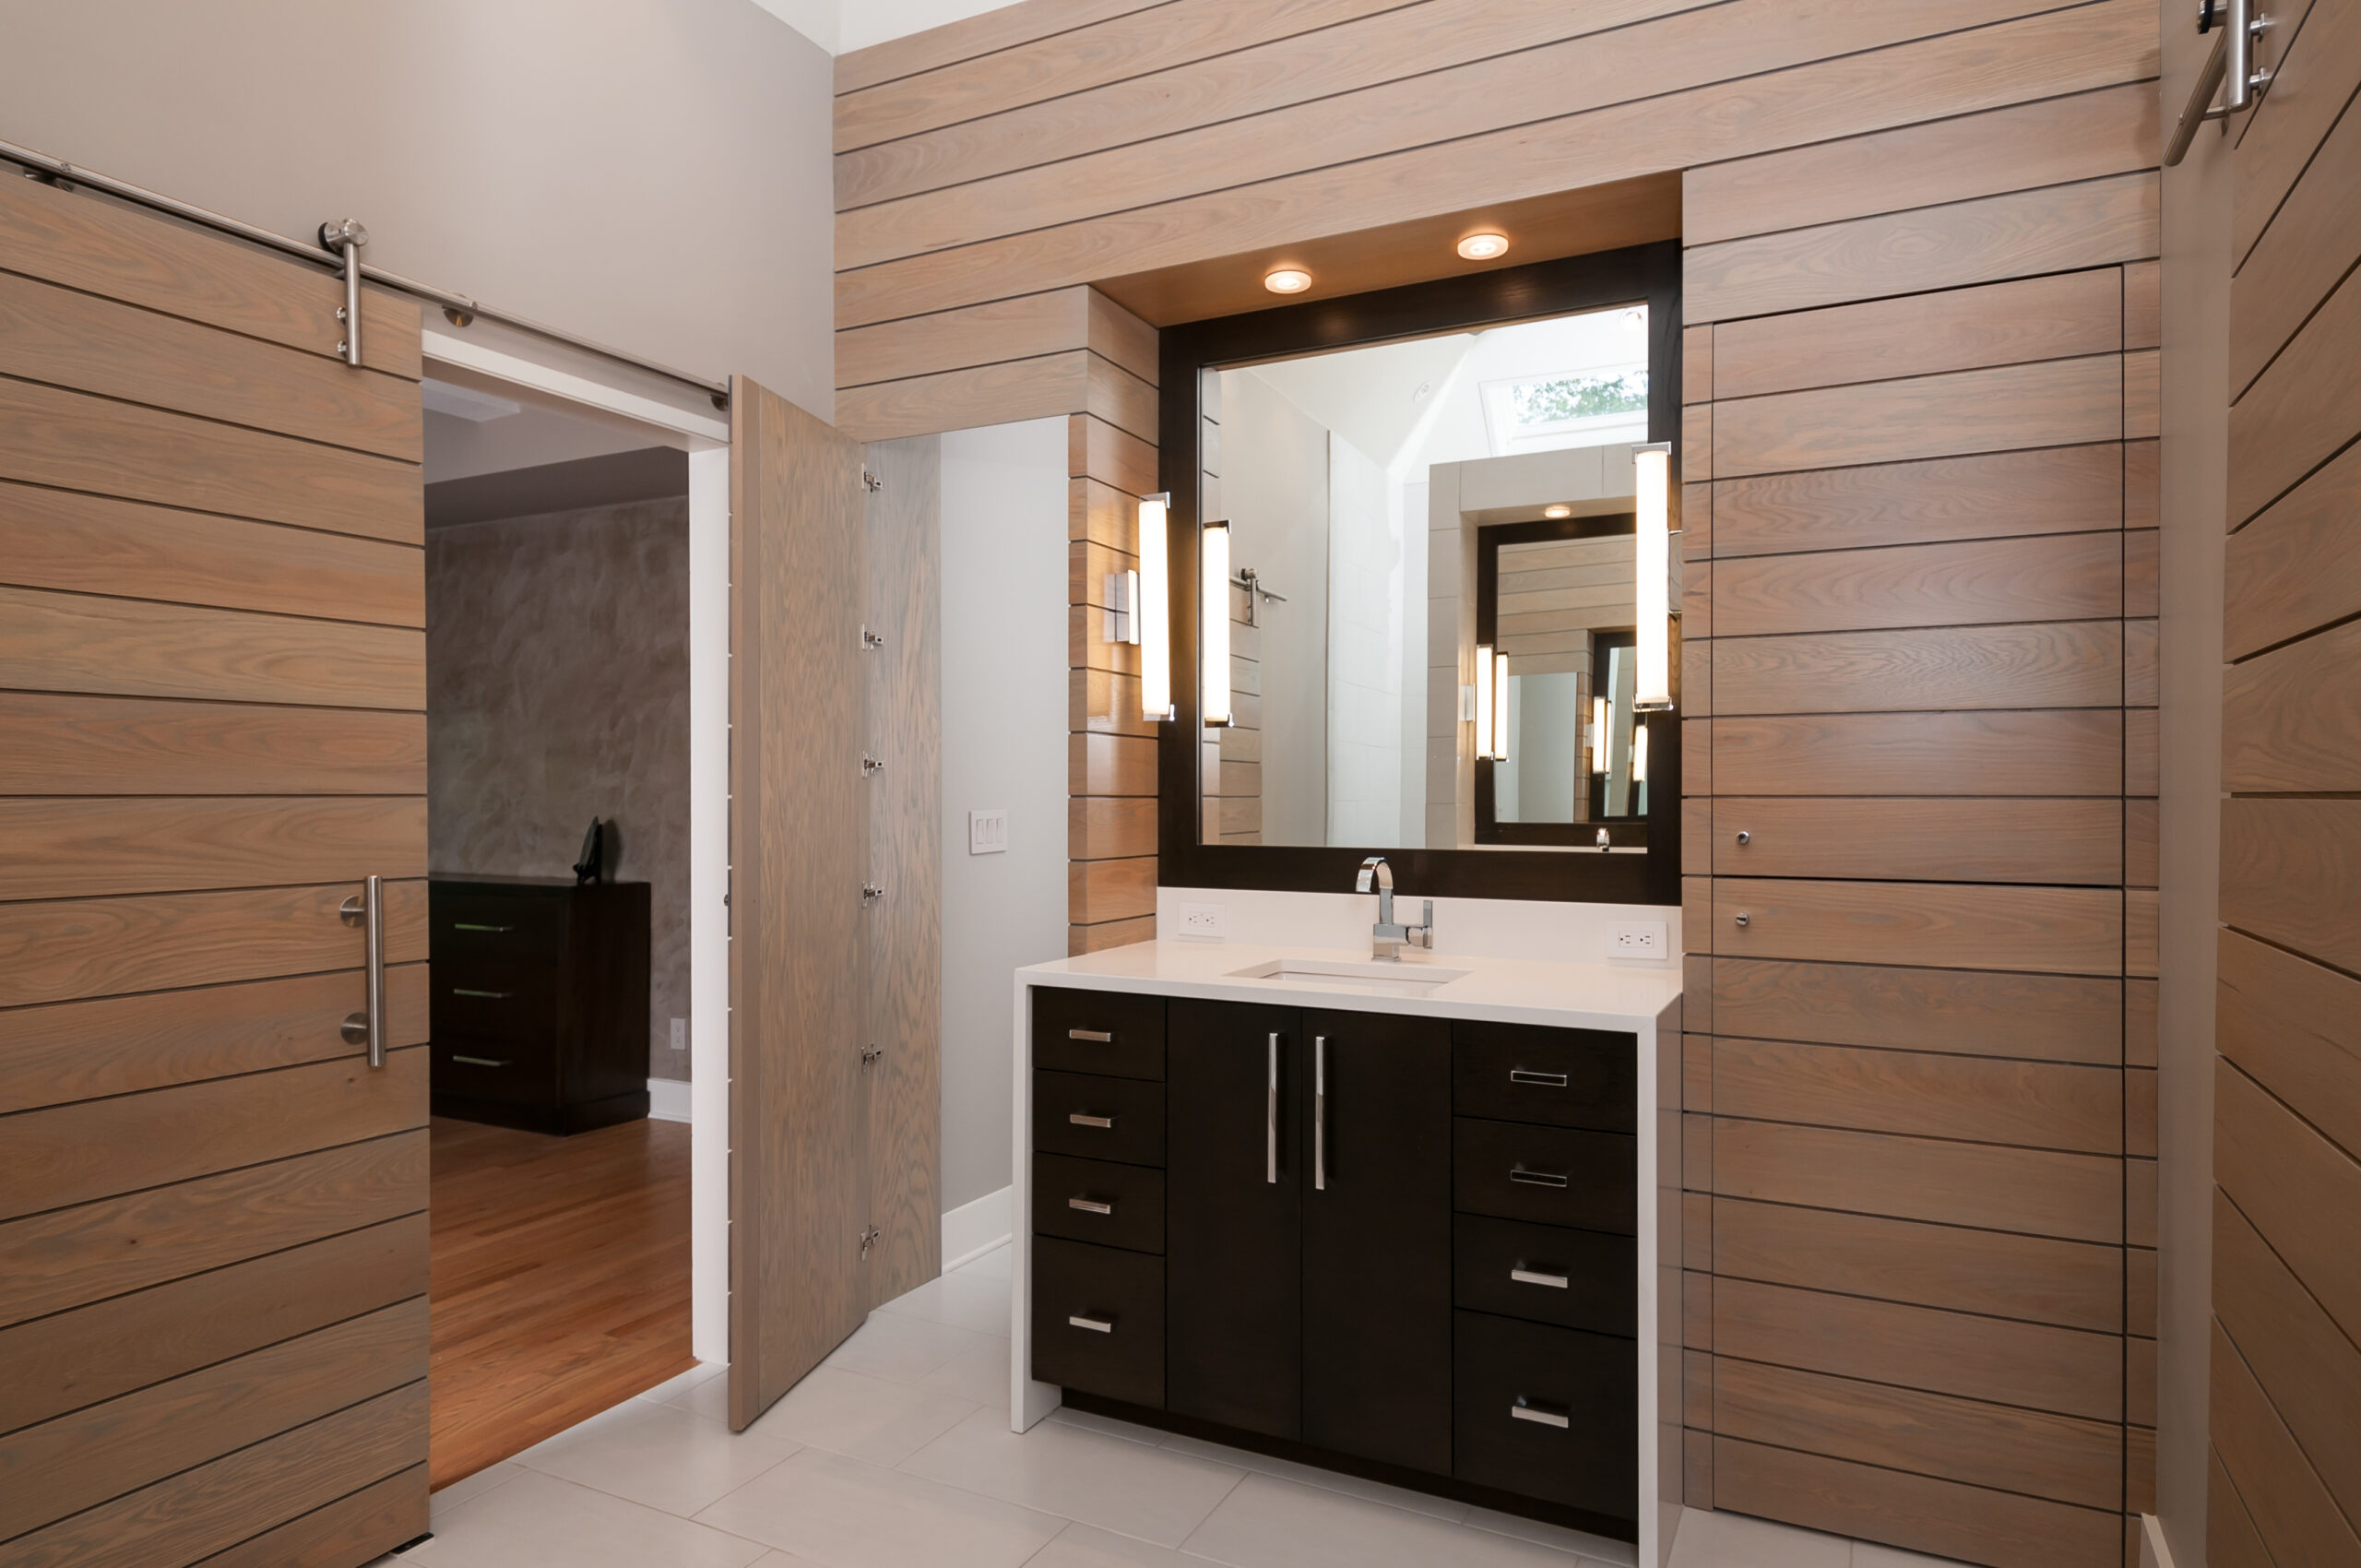 10 Bathroom Trends for 2023